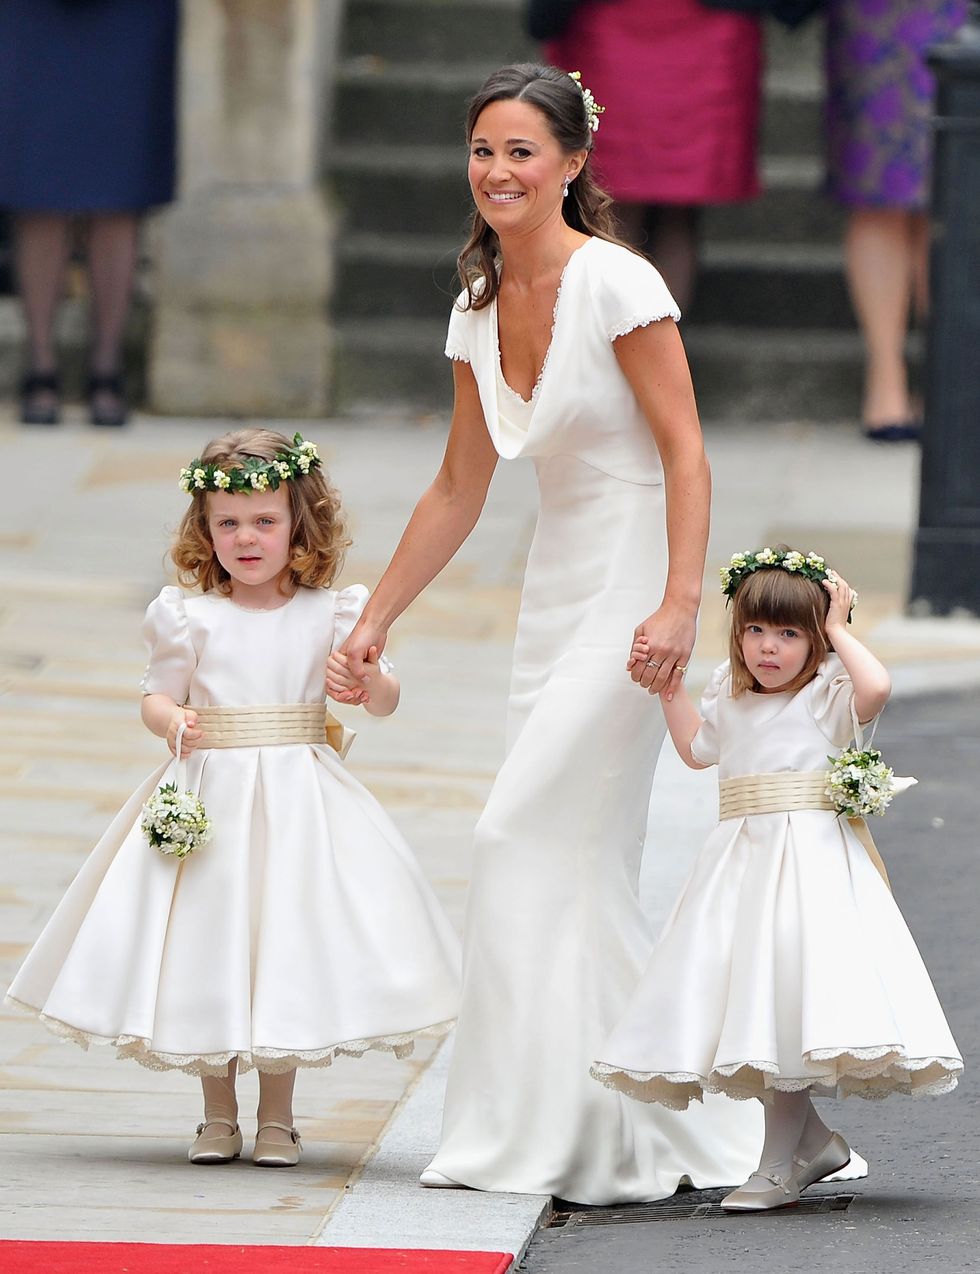 The rules for being a good bridesmaid - Pippa Middleton